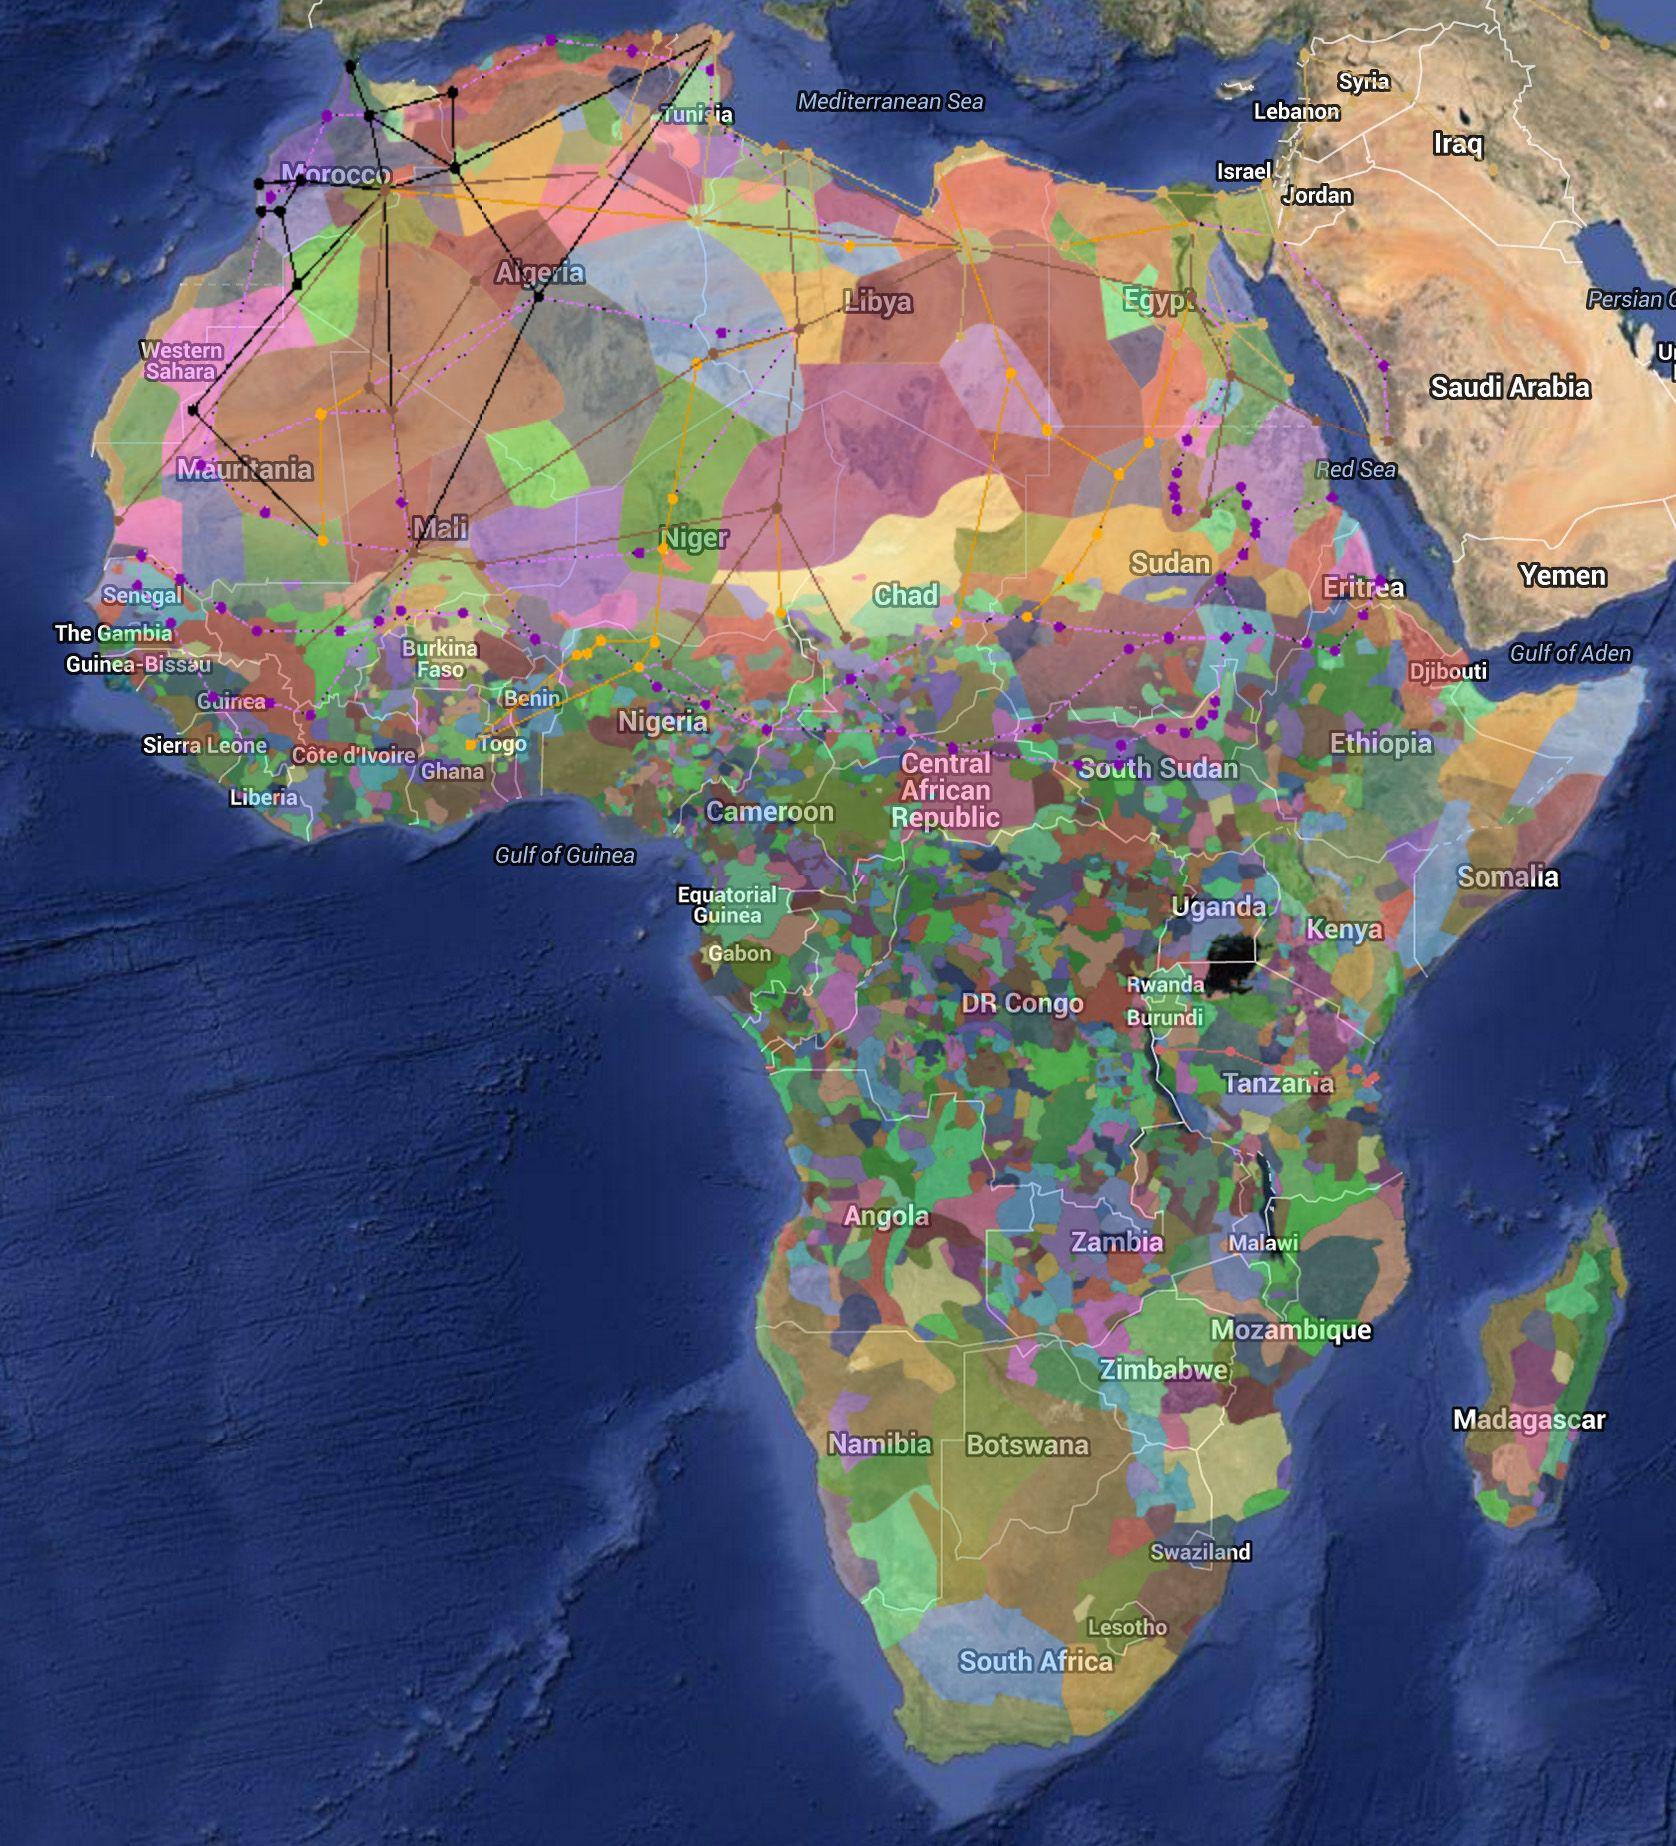 Ethnic Color Earth Logo - A Fascinating Color Coded Map Of Africa's Diversity